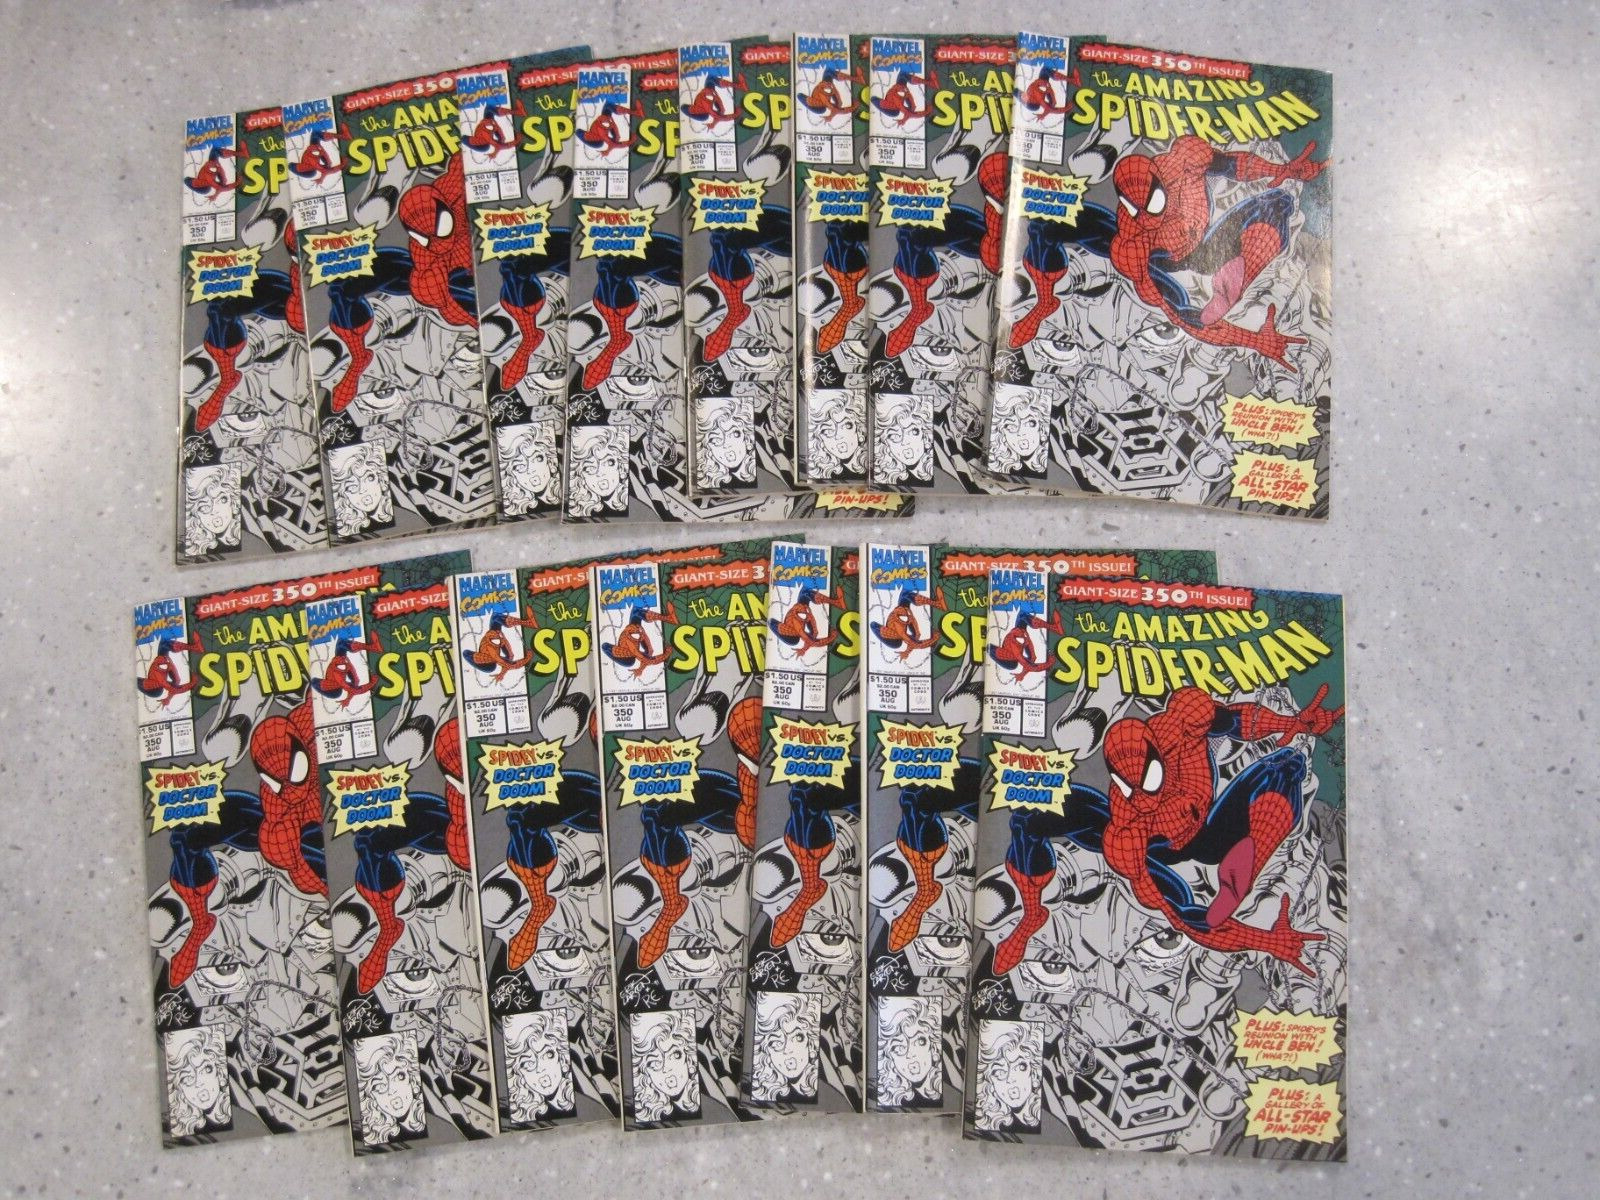 Marvel The Amazing Spider-Man #350 Giant Size 1991 Lot of 15 Books  (43)